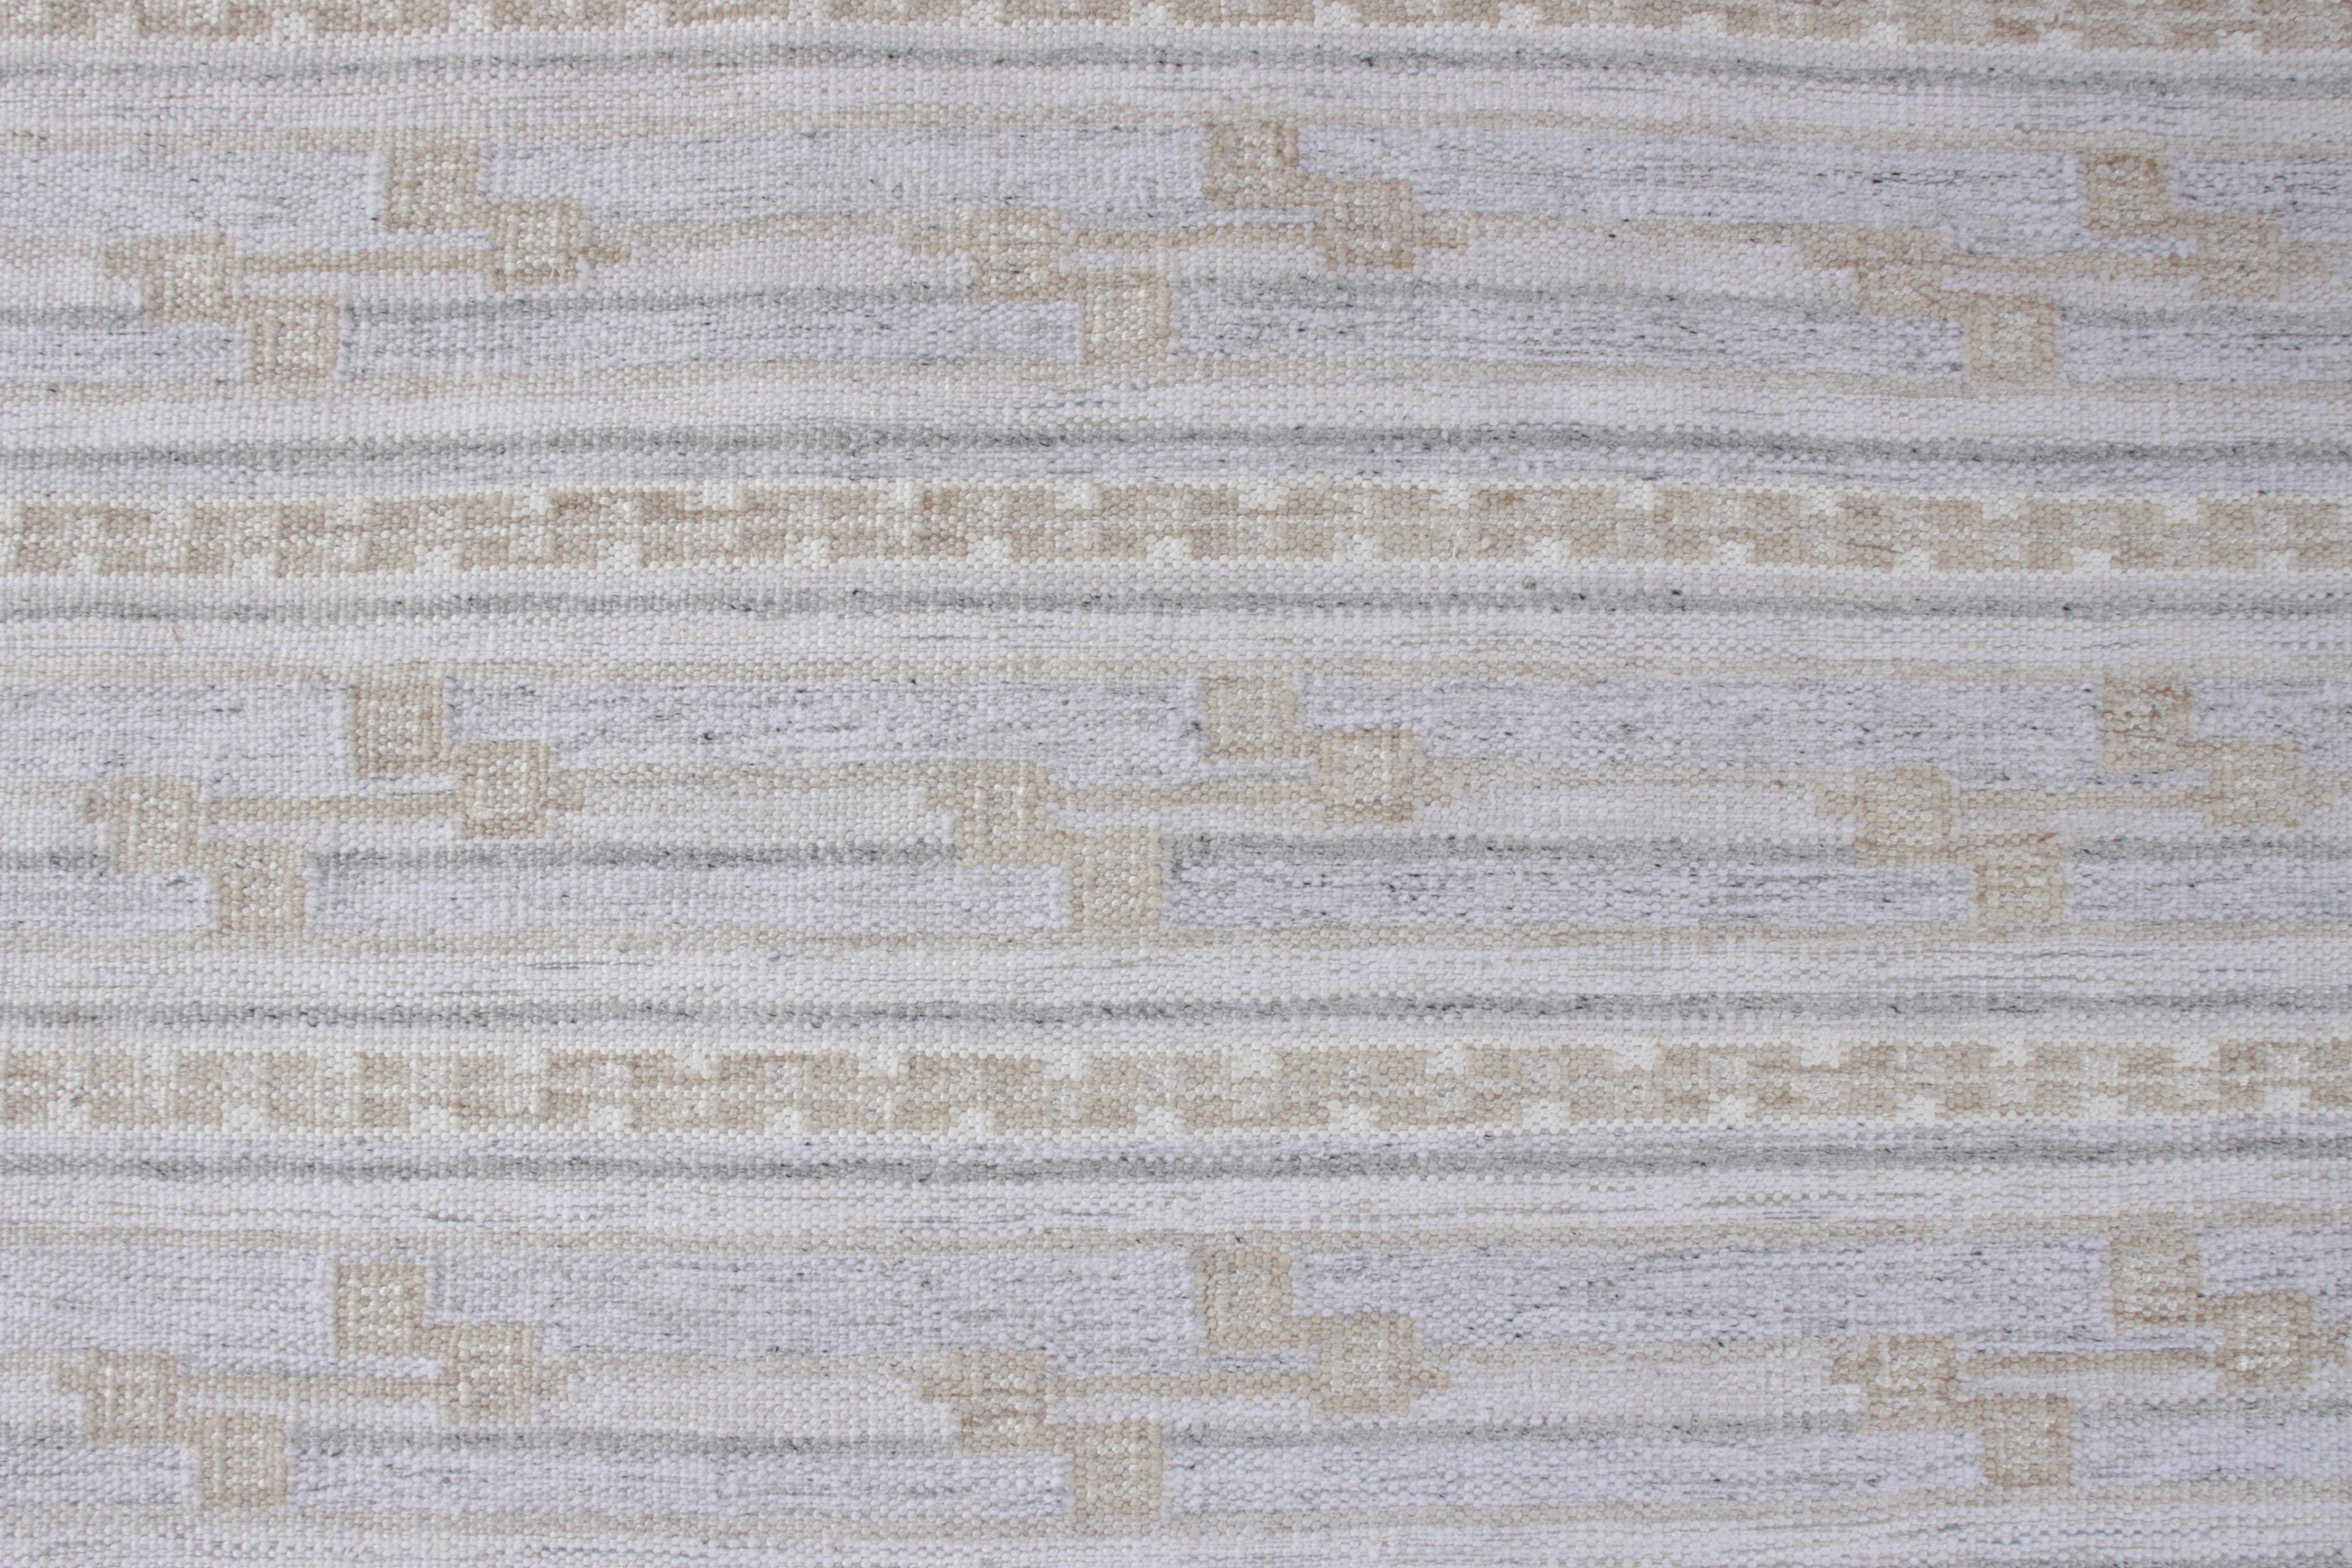 Indian Rug & Kilim’s Scandinavian Style Kilim in All over Blue, Beige Geometric Patter For Sale